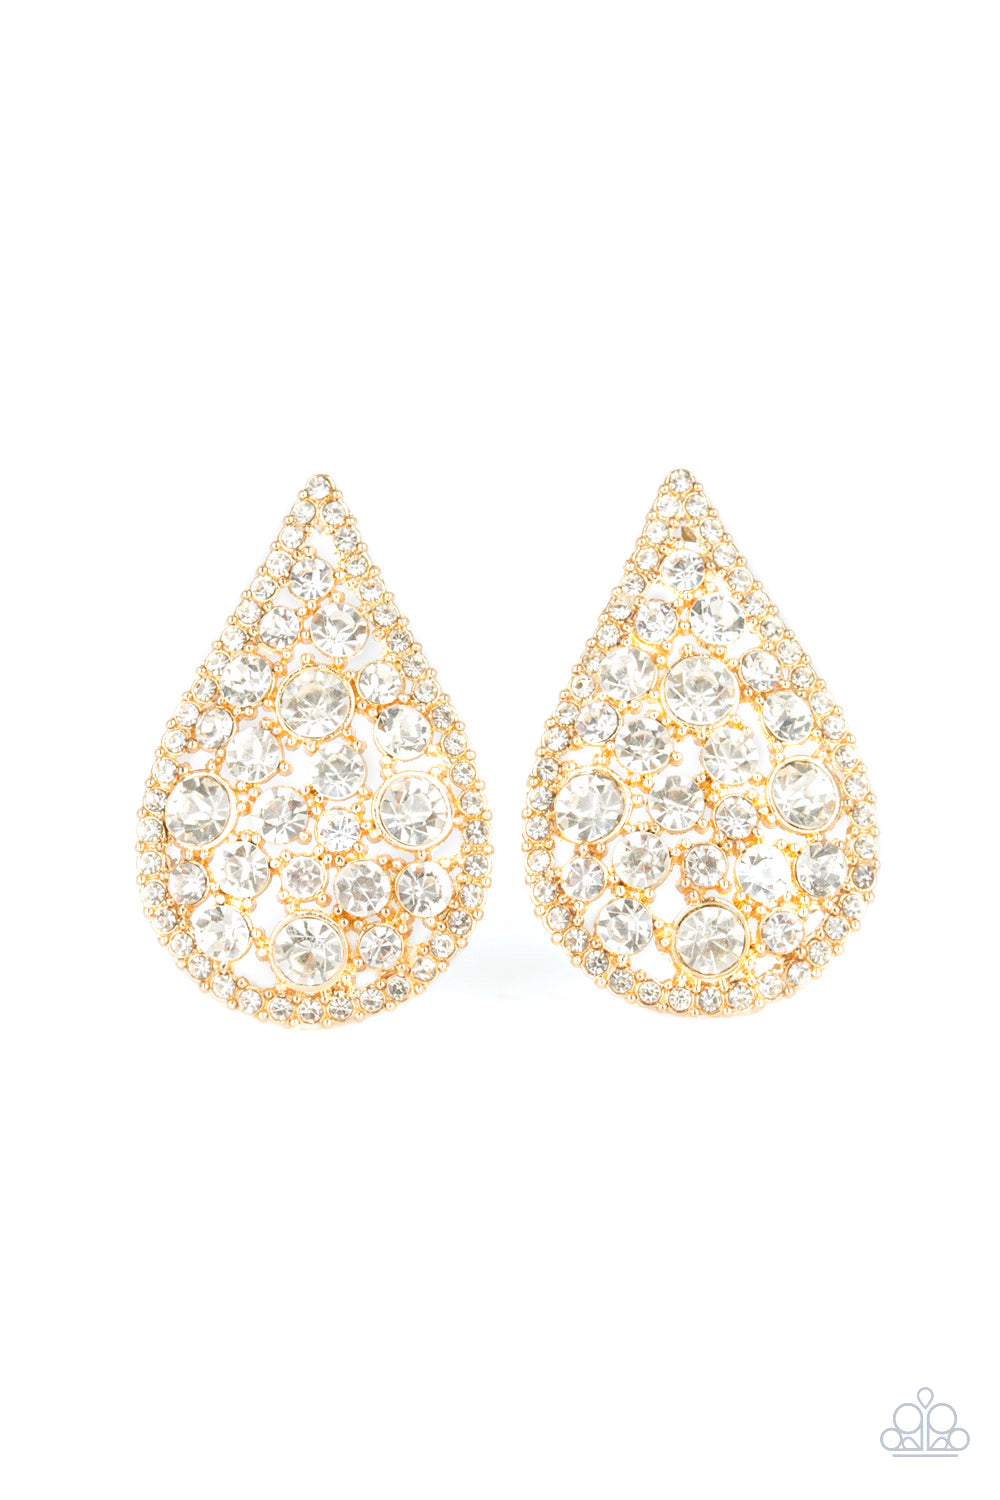 Paparazzi REIGN-Storm - Gold Earrings